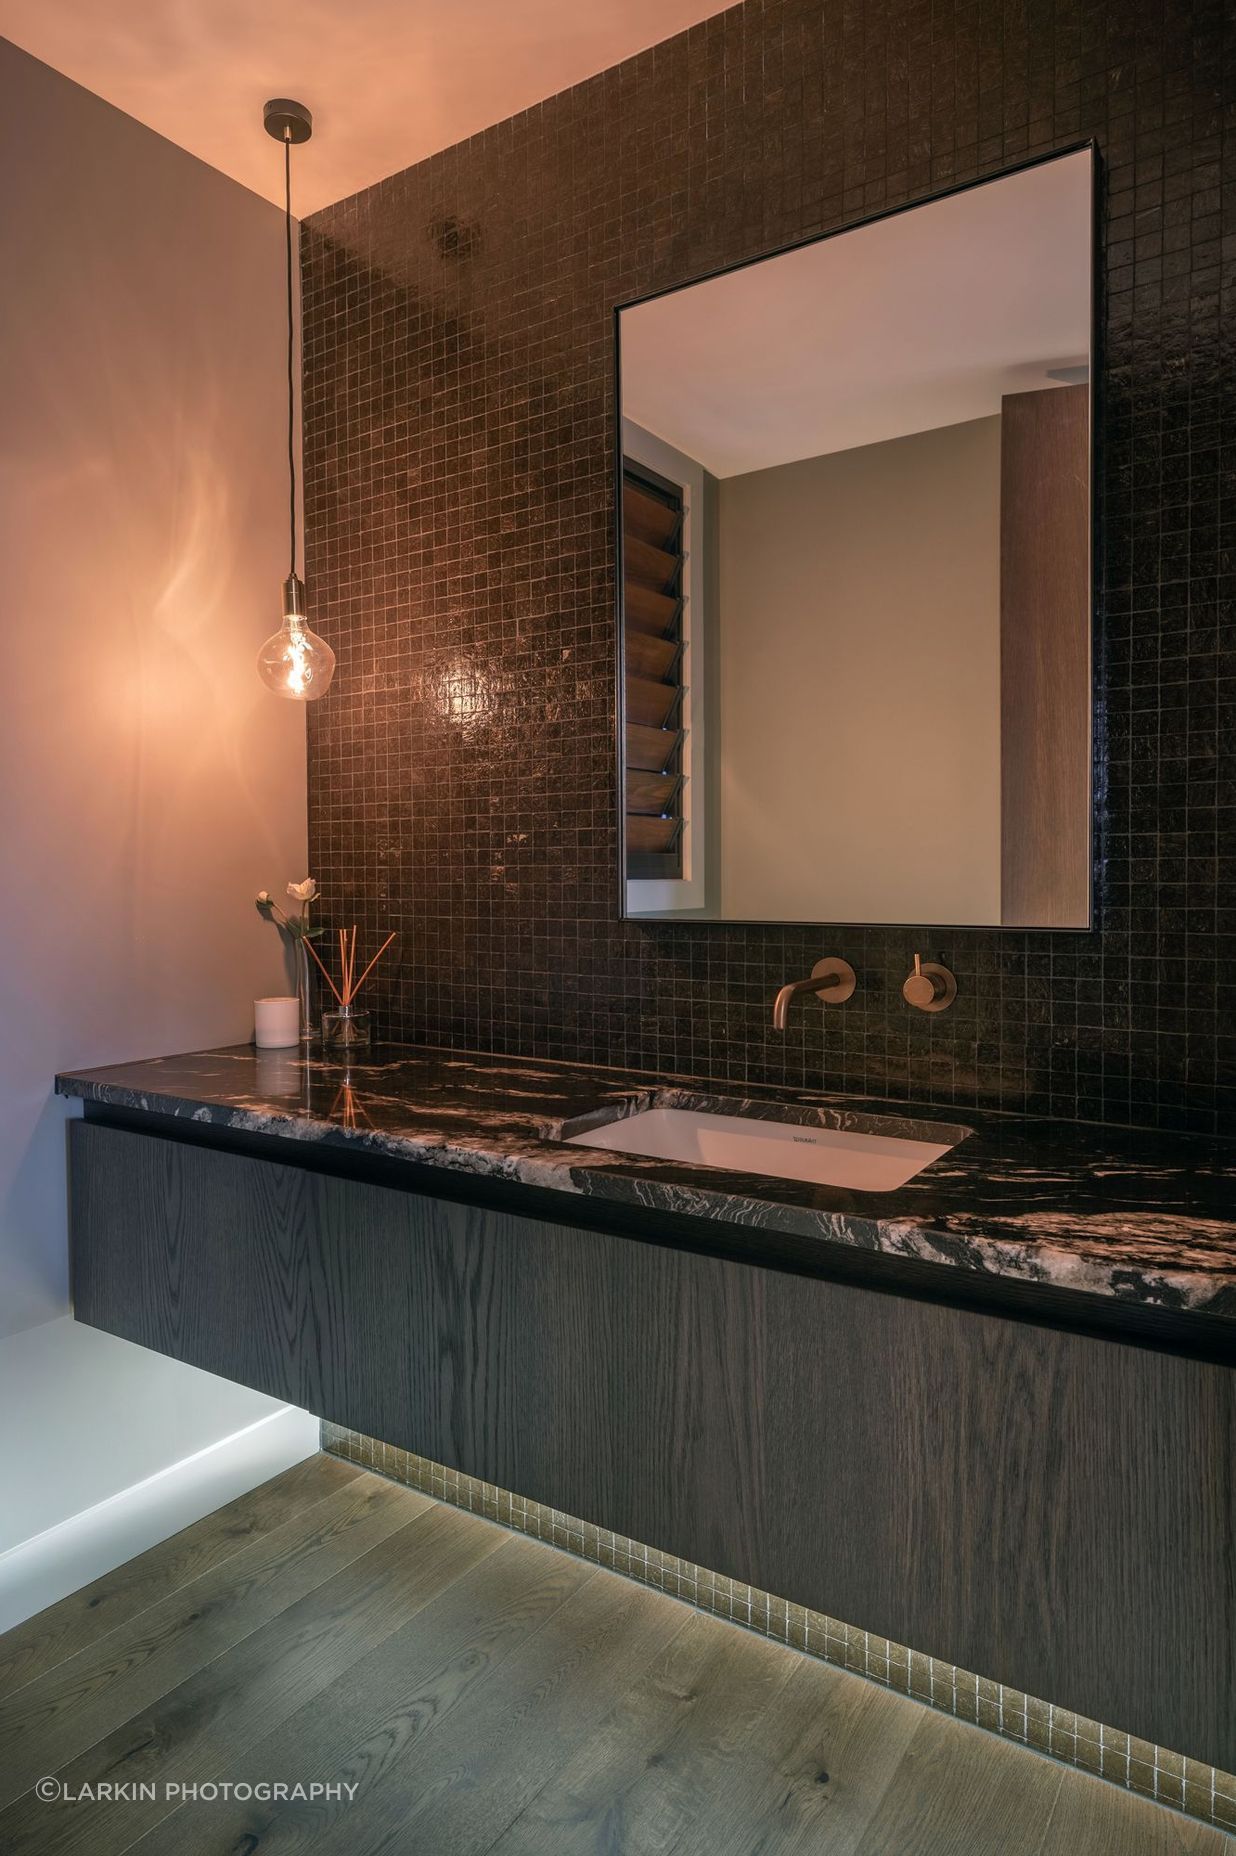 The large guest room's en suite features a dramatic granite countertop.